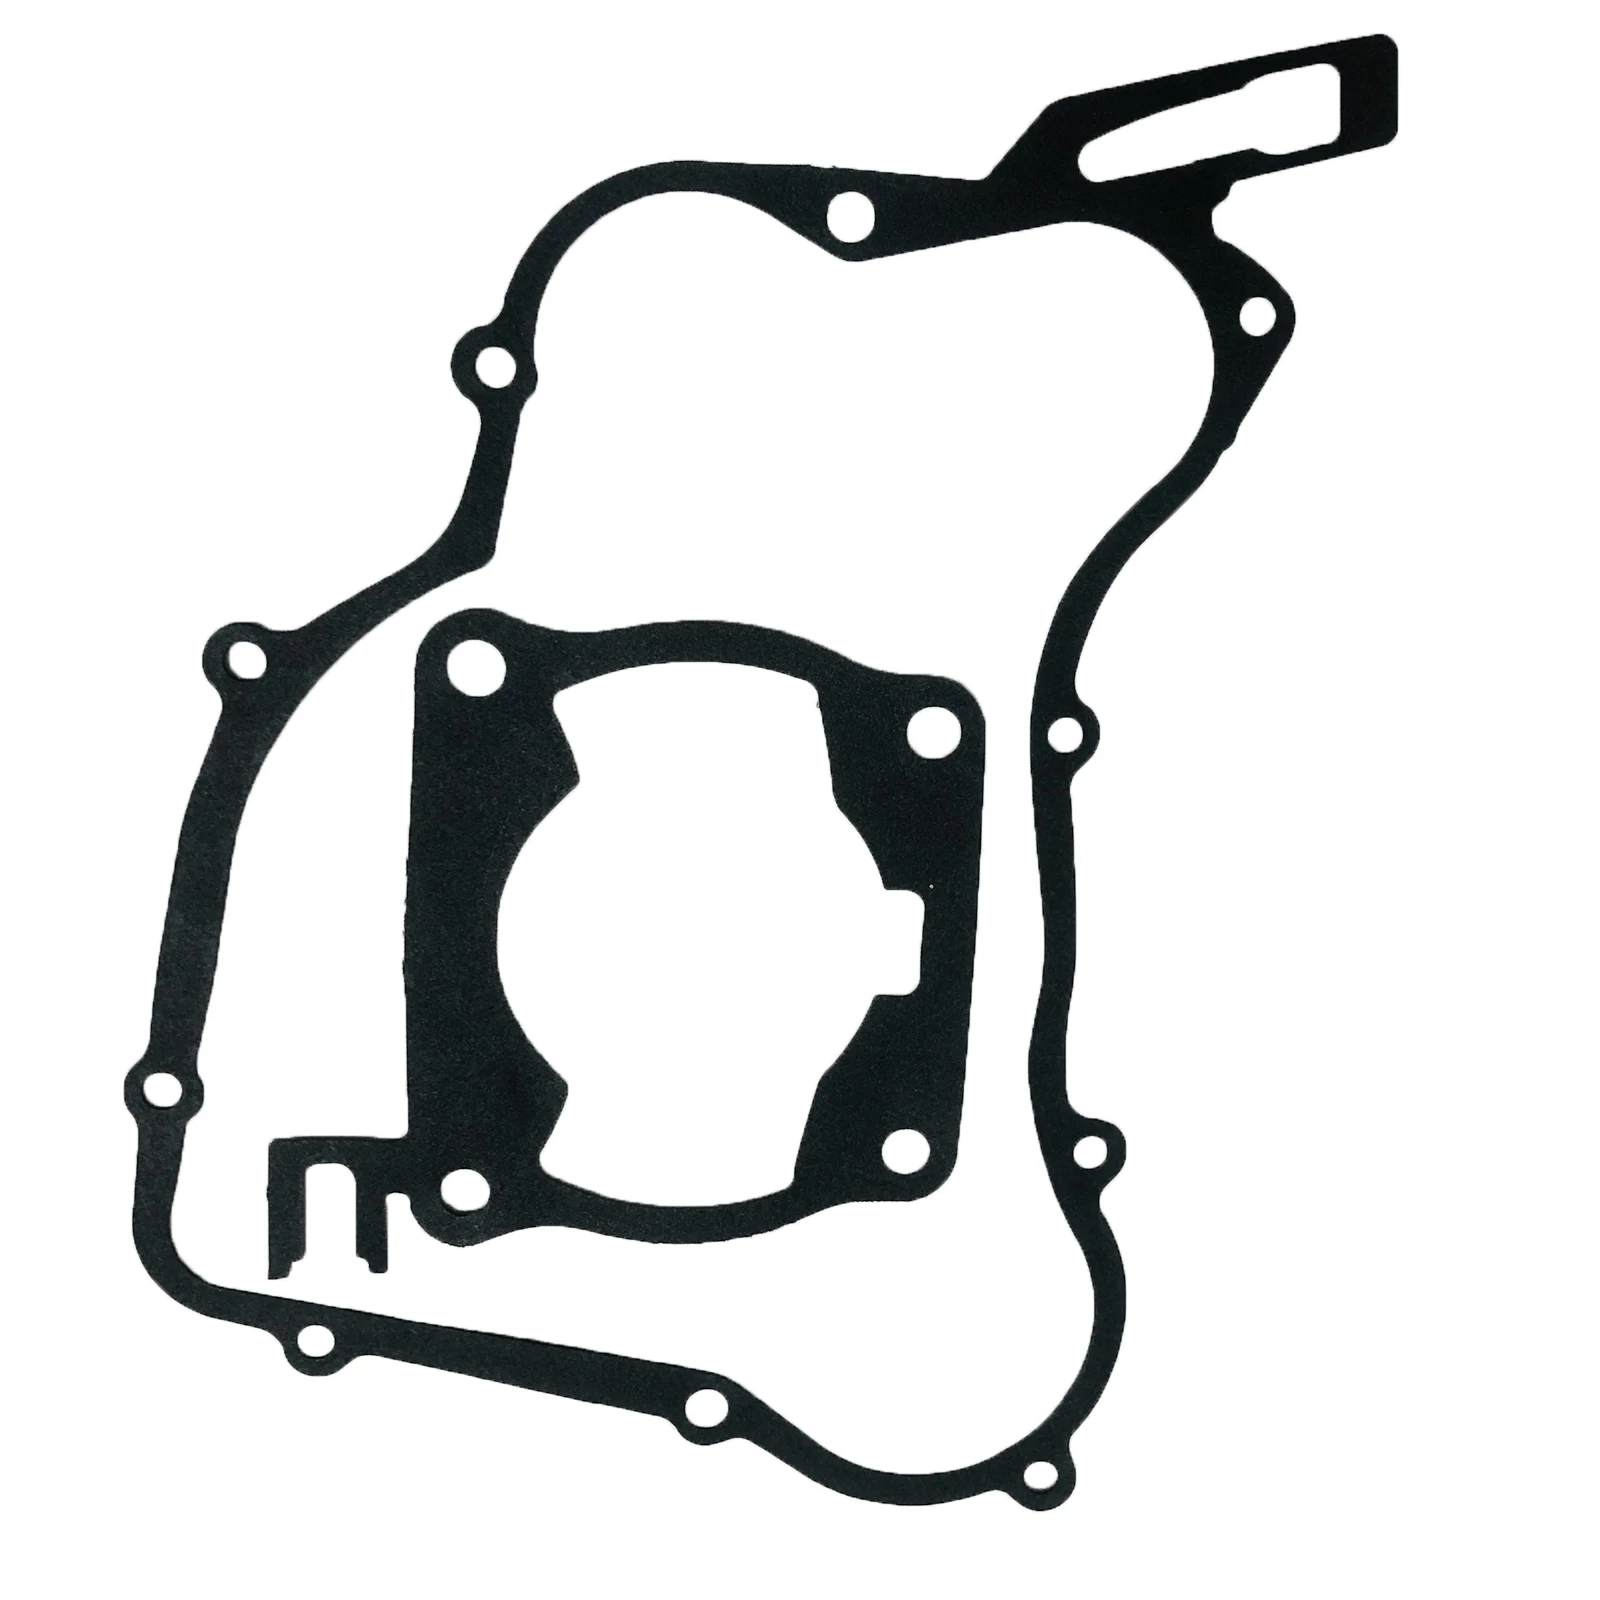 Complete Full Gasket Kit For Honda Cr250r 2002-2004 Cr 250 Top And Bottom  End Gasket Kit Cyl. Head  Valve Cover Gasket AliExpress